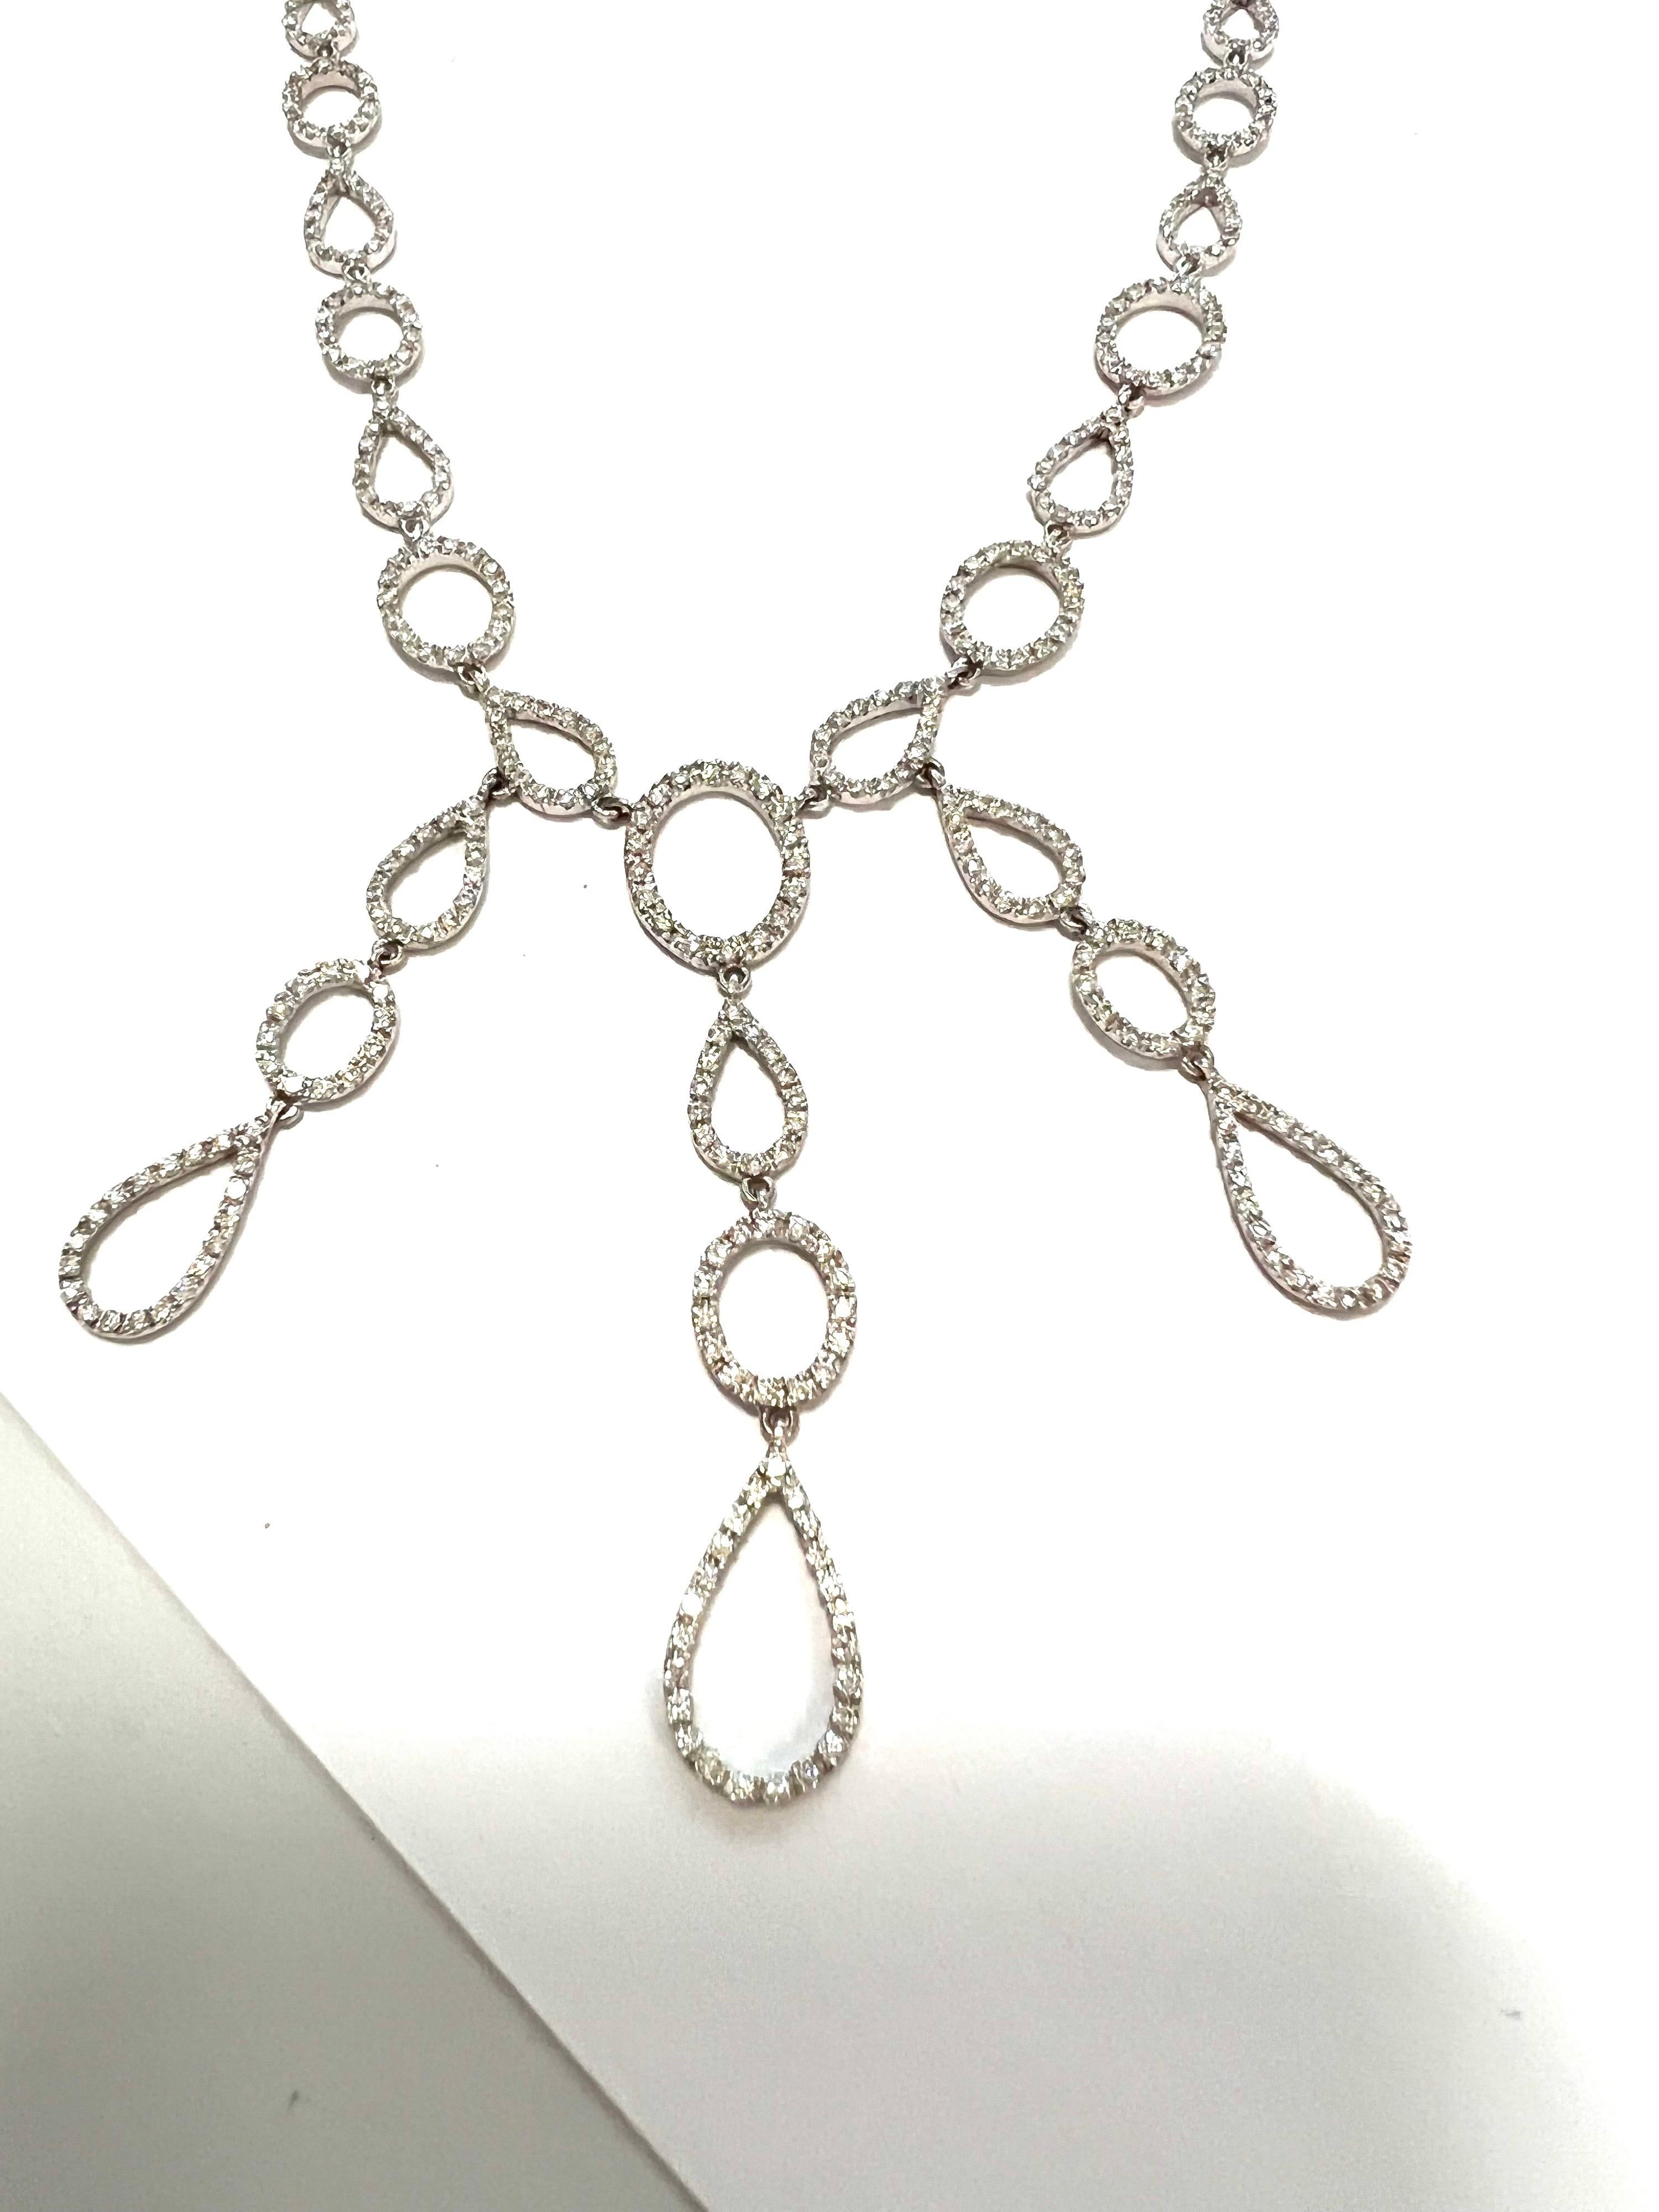 18k white gold and diamond choker.
Romantic choker in white gold and diamond links with dangling drops.
Total gold weight gr.20.70 
373 Diamonds GVVS  ct.3.51
Length cm.39
Stamp 750 ITALY
 